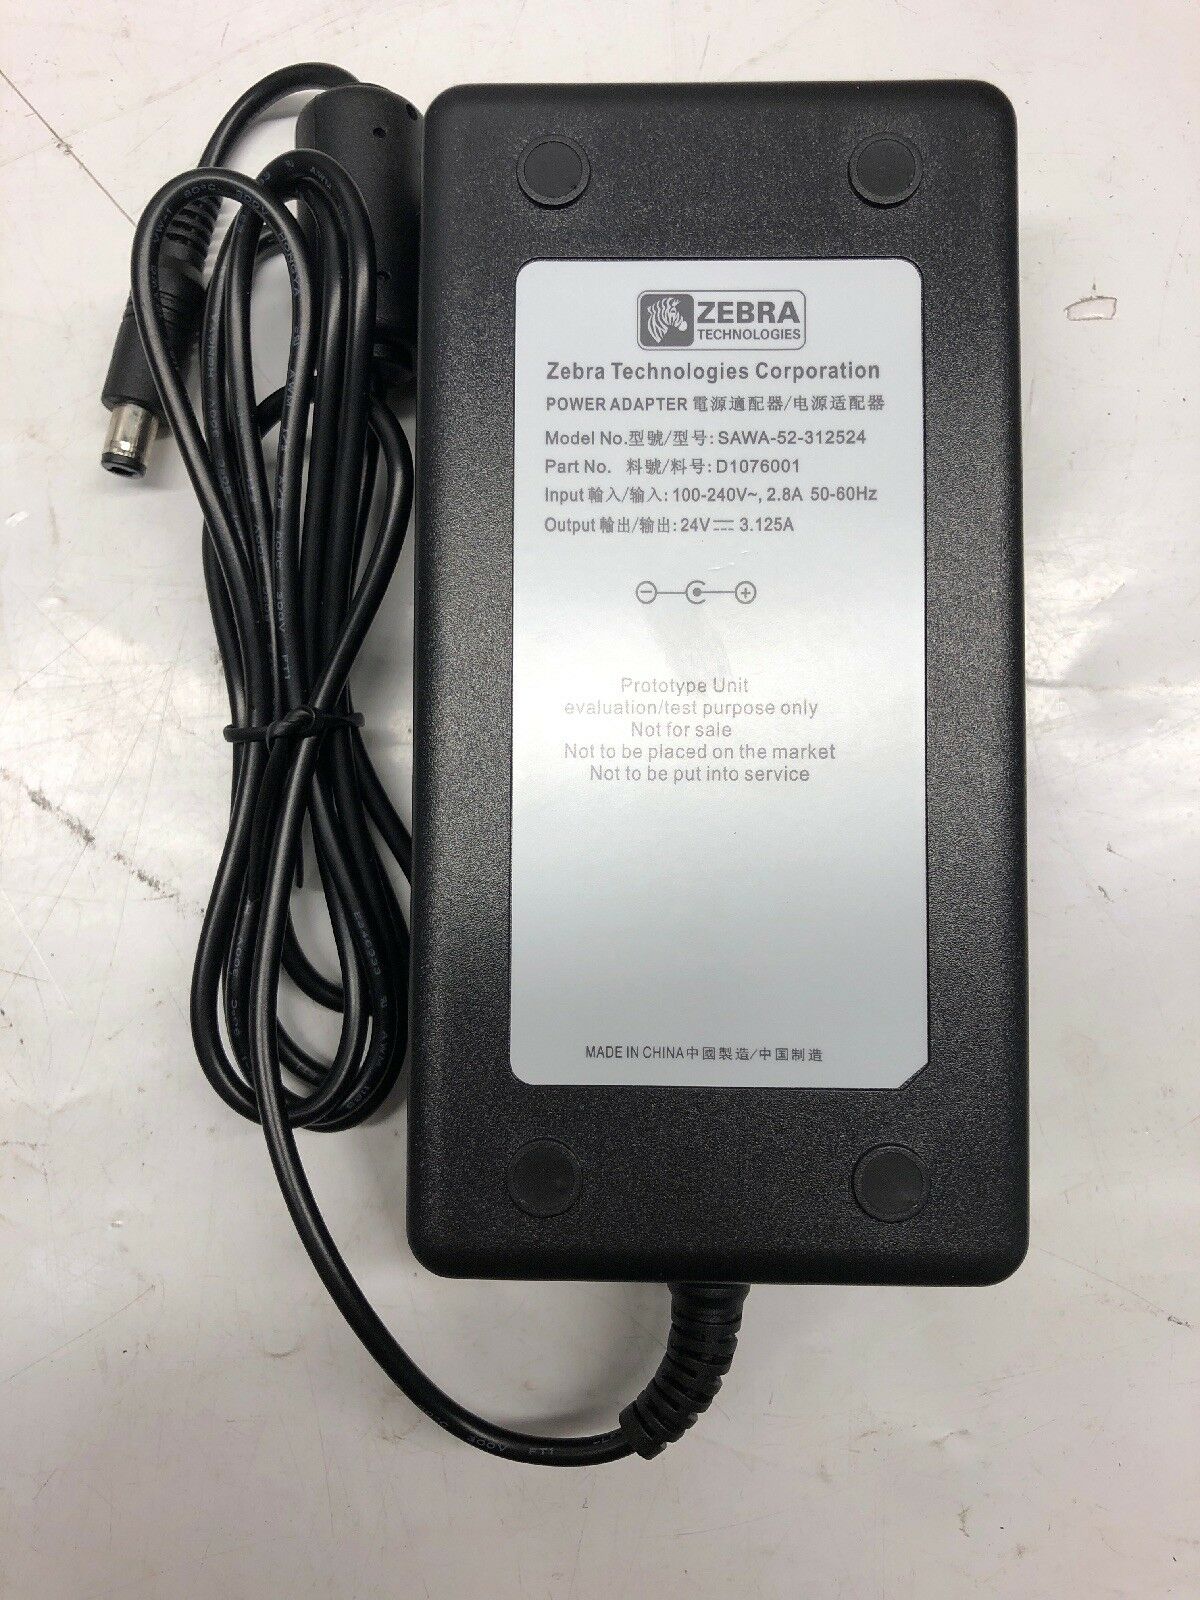 Zebra Thermal Printer Power Supply Adapter SAWA-52-312524 (output 24V-3.125A) Country/Region of Man - Click Image to Close